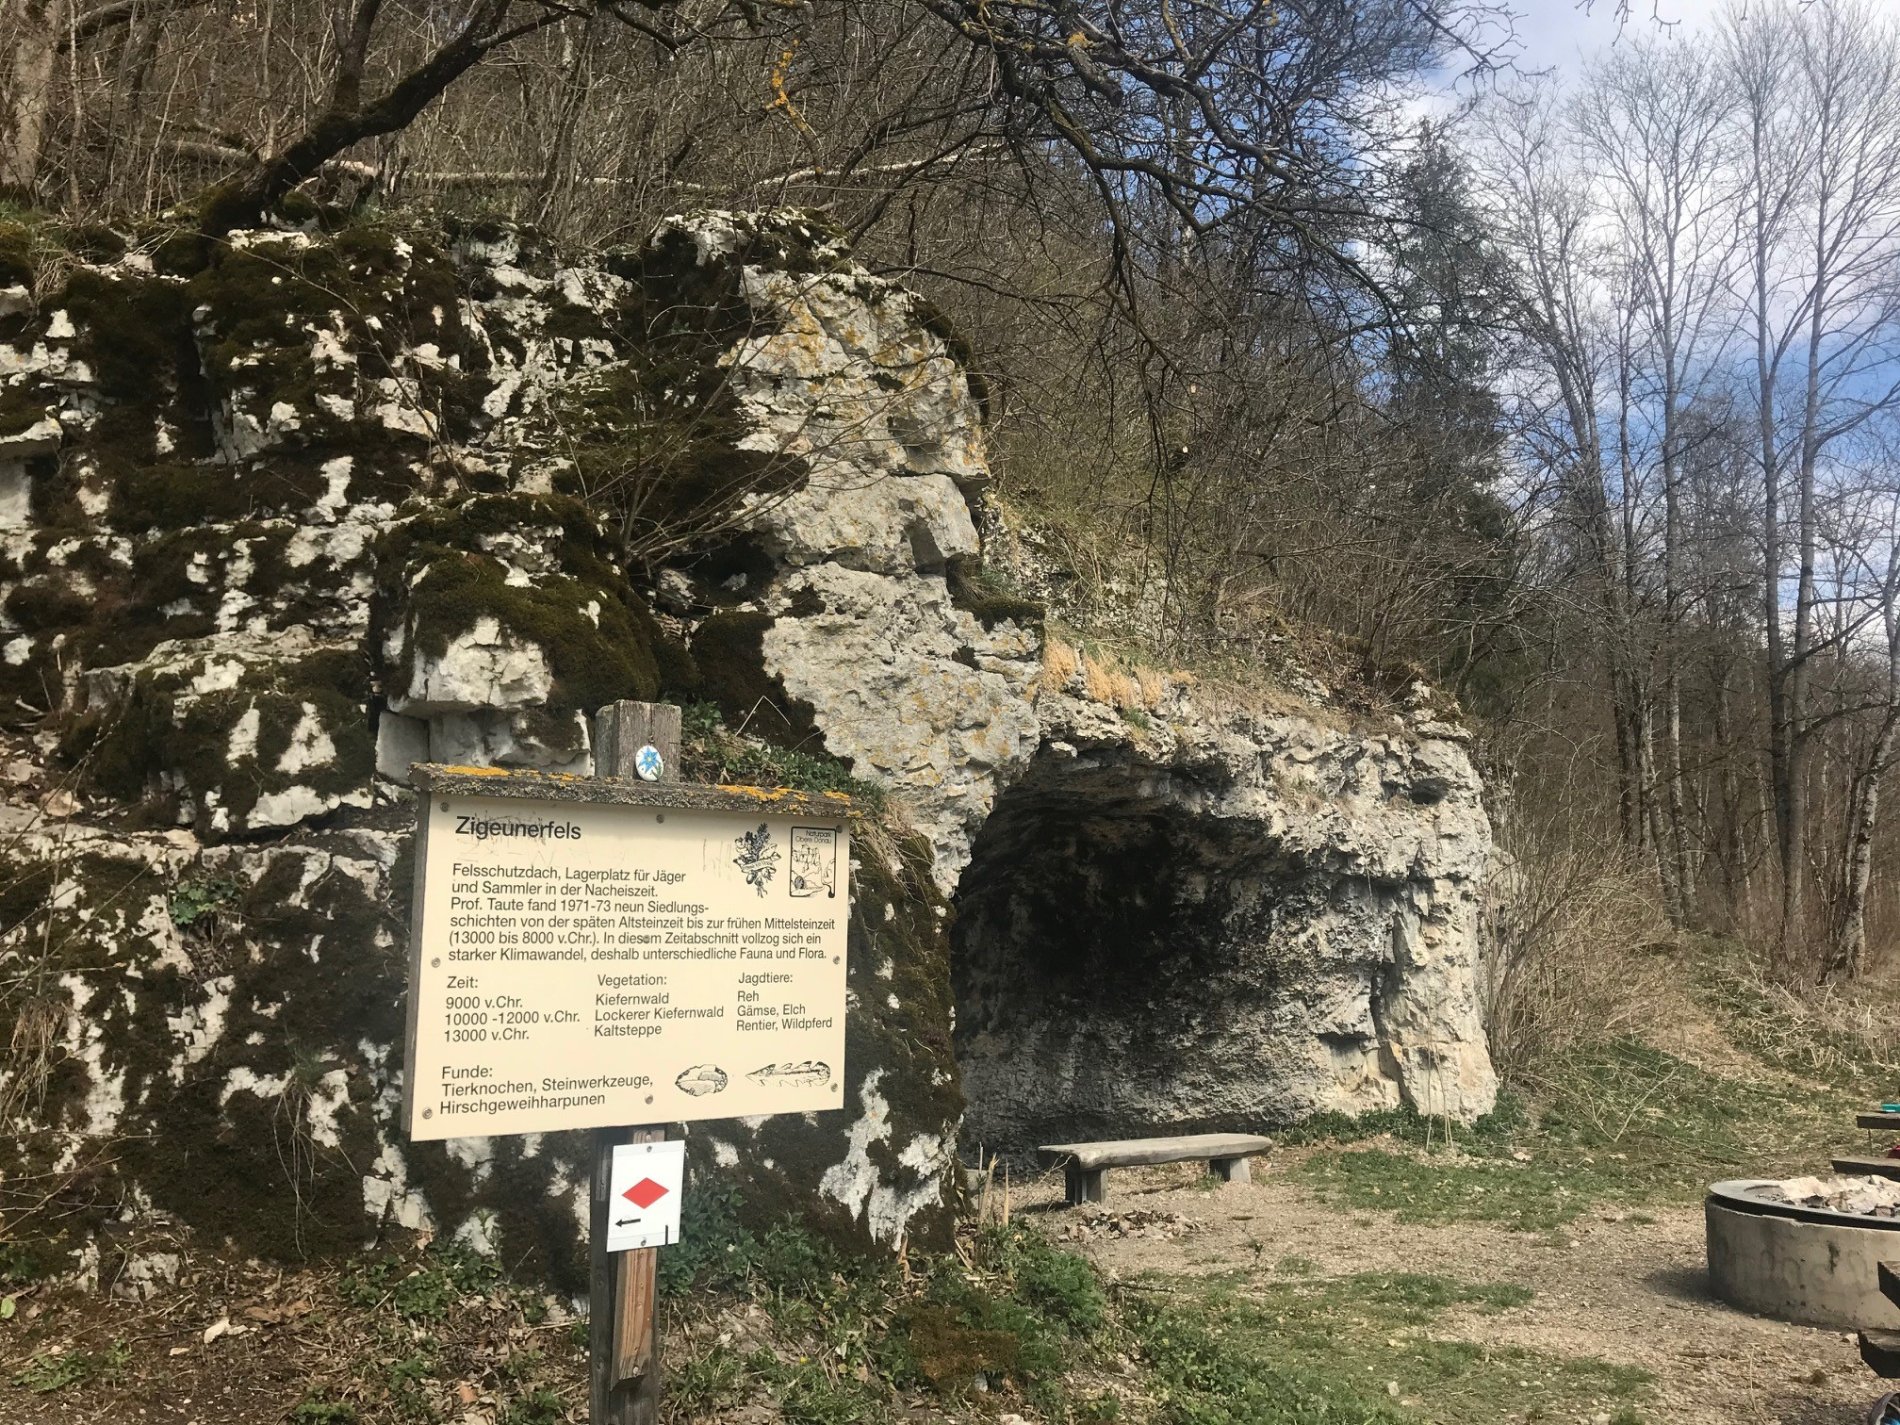 Zigeunerfels with information board and fireplace